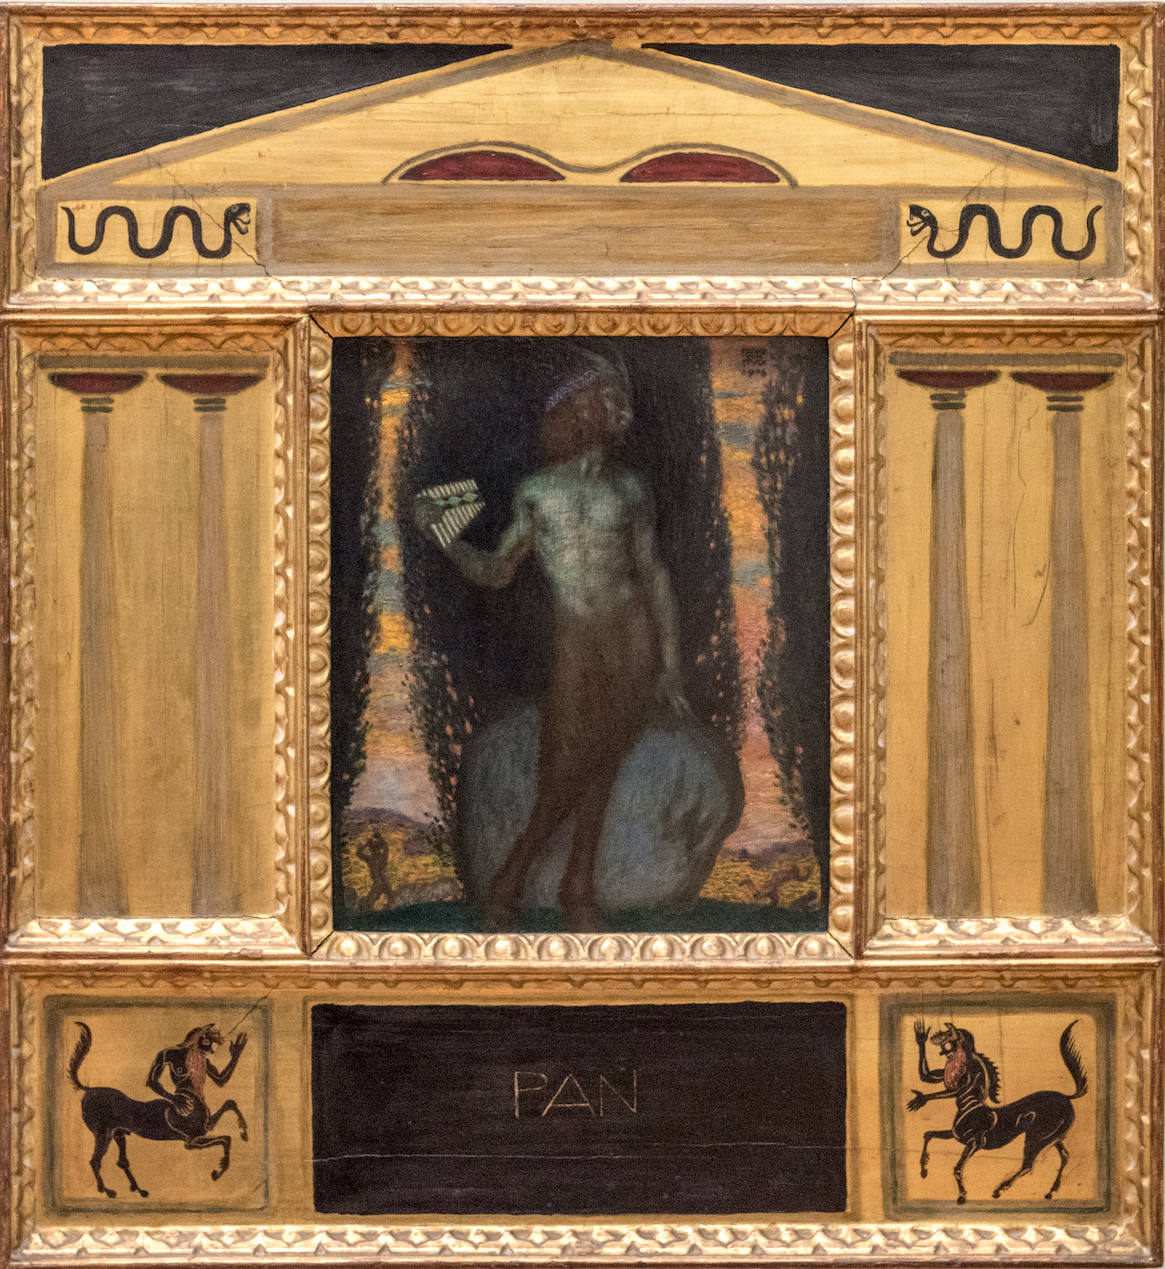 Franz von Stuck. Pan. 1908. By Tilman2007 - Own work, CC BY-SA 4.0, https://commons.wikimedia.org/w/index.php?curid=51993656